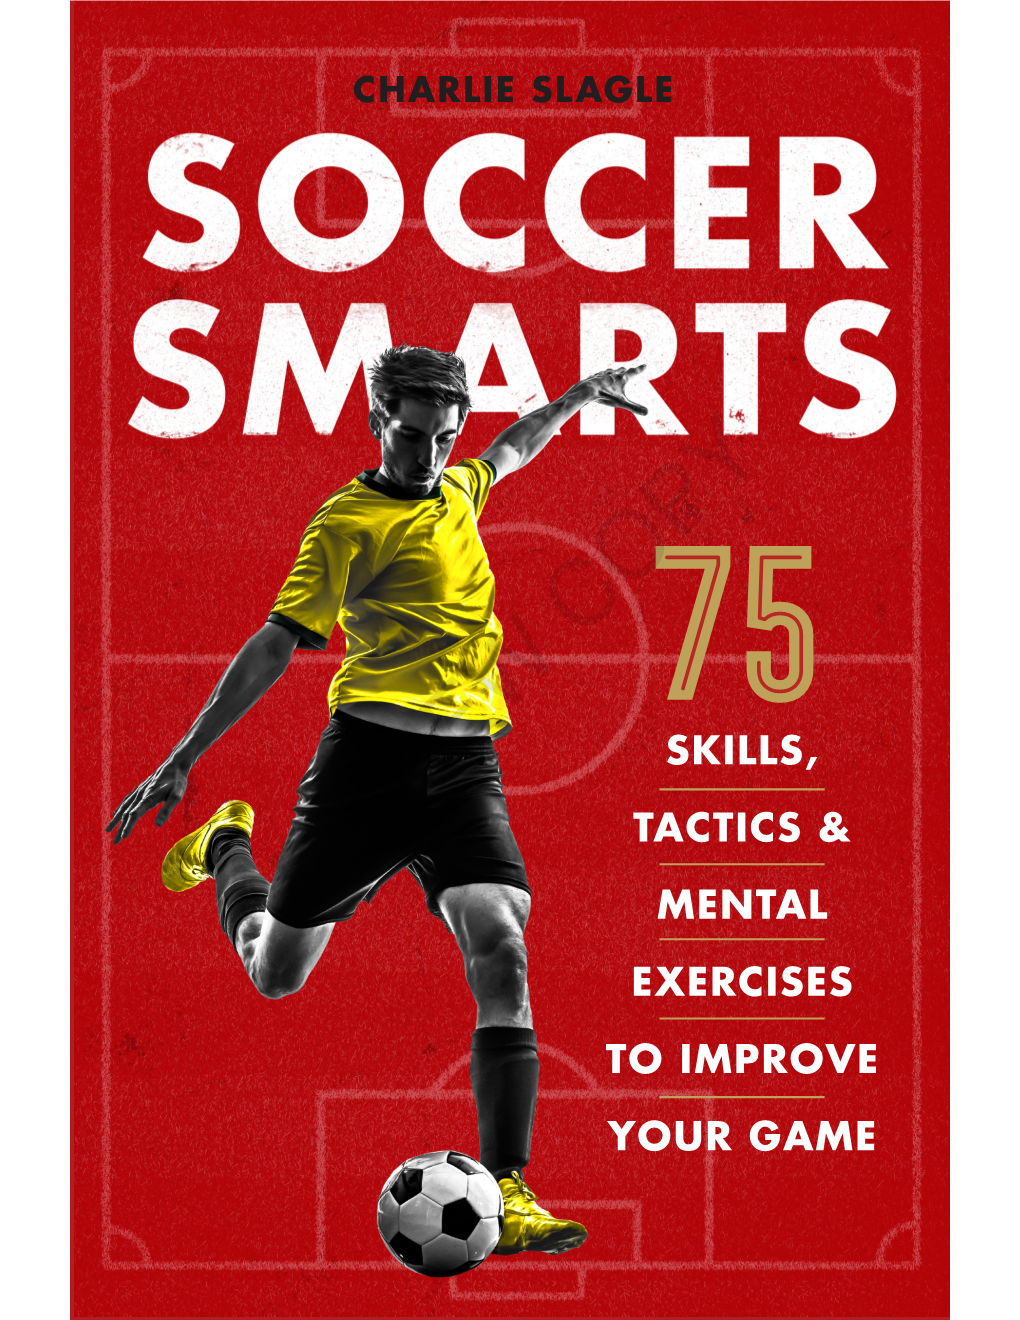 Review Copymental Exercises to Improve Your Game Soccer Smarts